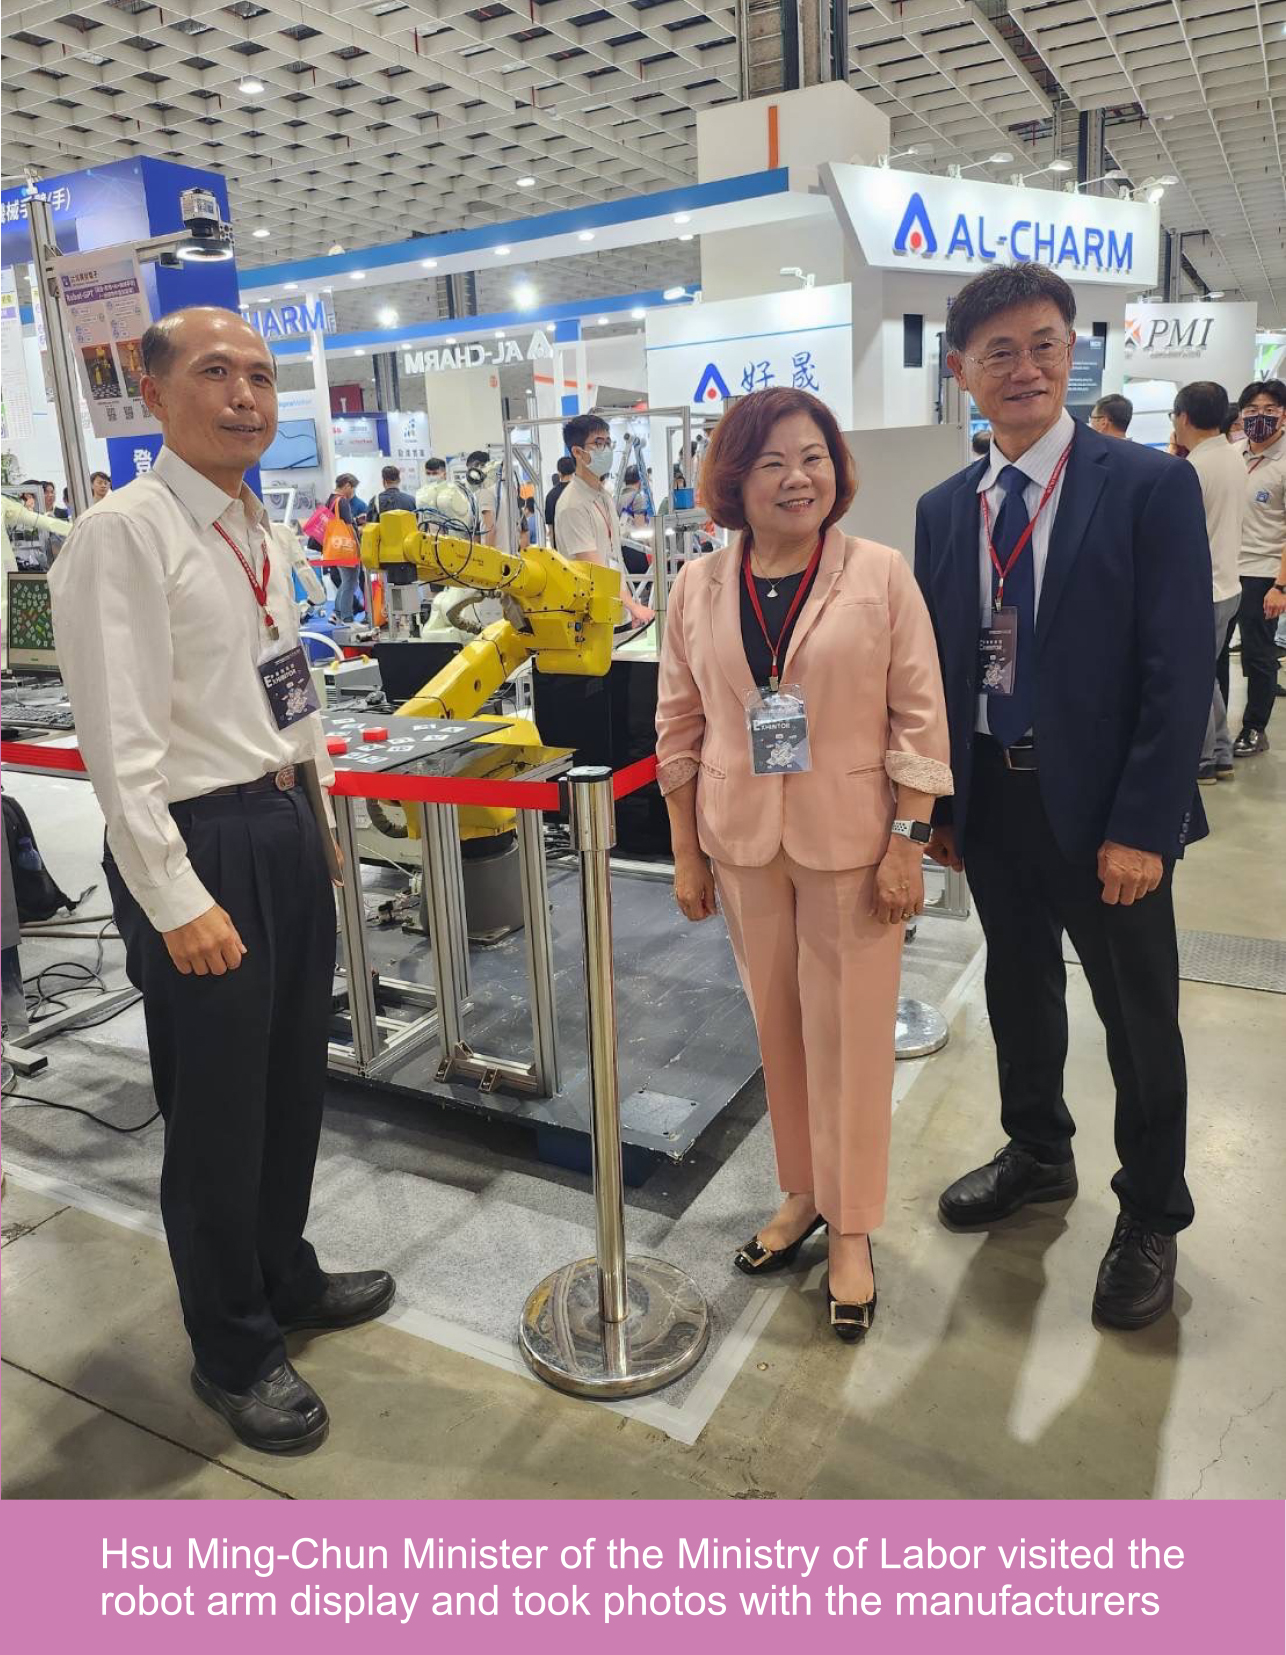 The Ministry of Labor follow closely the Trend of Industrial Robots and Smart Automation Developments, Making Advance Preparations on Workplace Safety and Workers' Rights and Protection